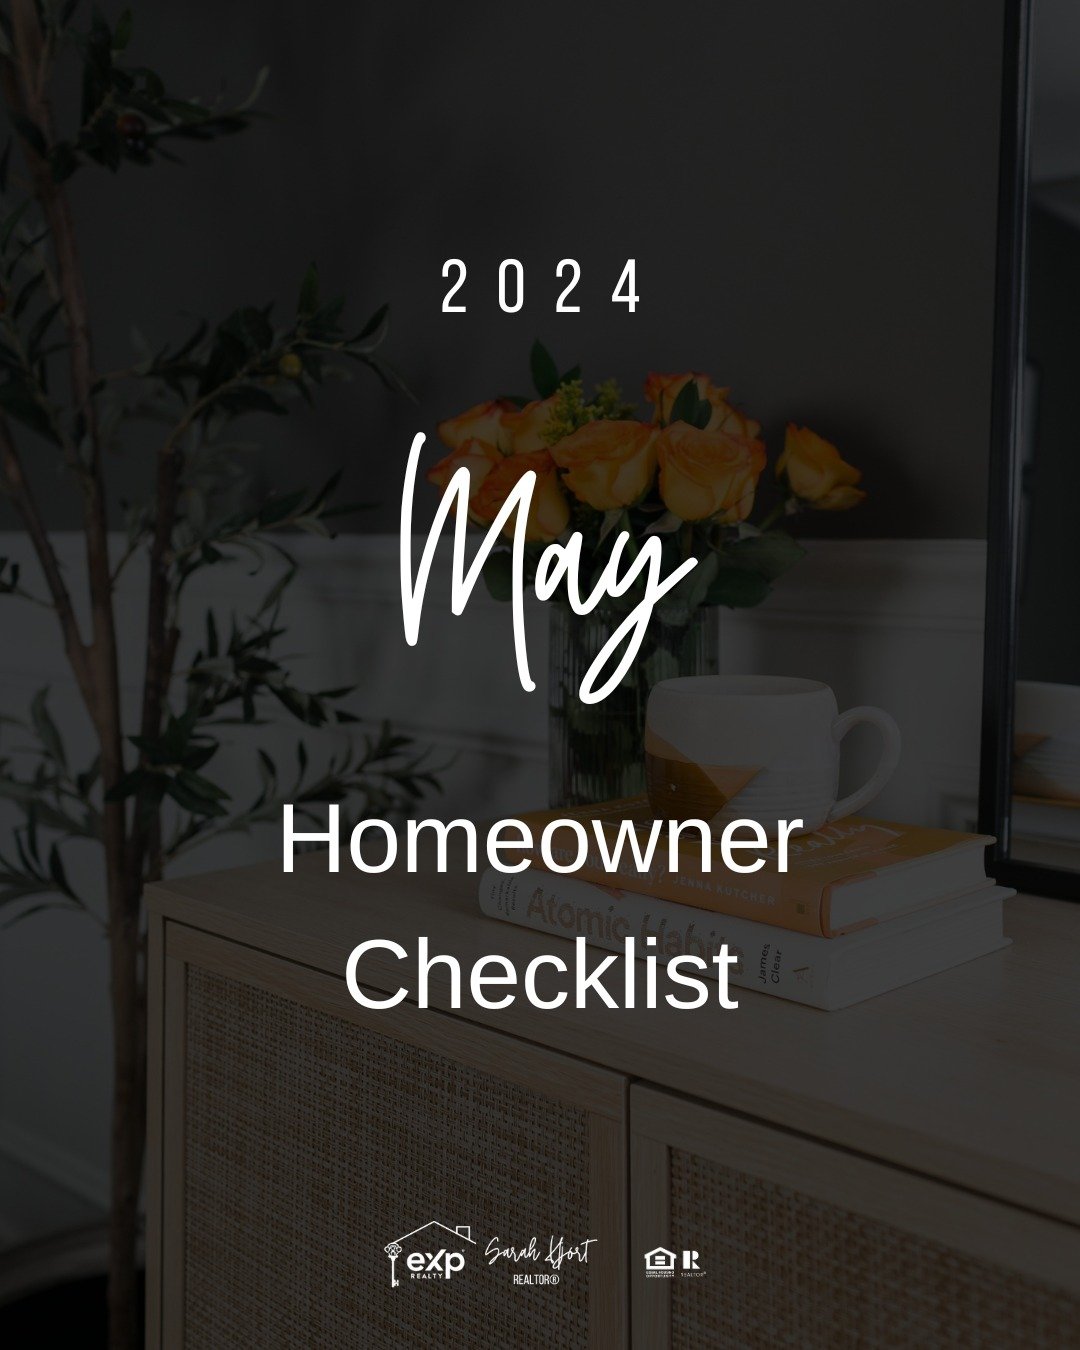 This might be my favorite homeowner checklist of the year because it is finally spring!

#homeownerchecklist #hometips #thingstodo #homemaintenance #yourstorybeginshere #homeownership #homebuyer #realestateexpert #buyorsellwithme #northeastohiorealto